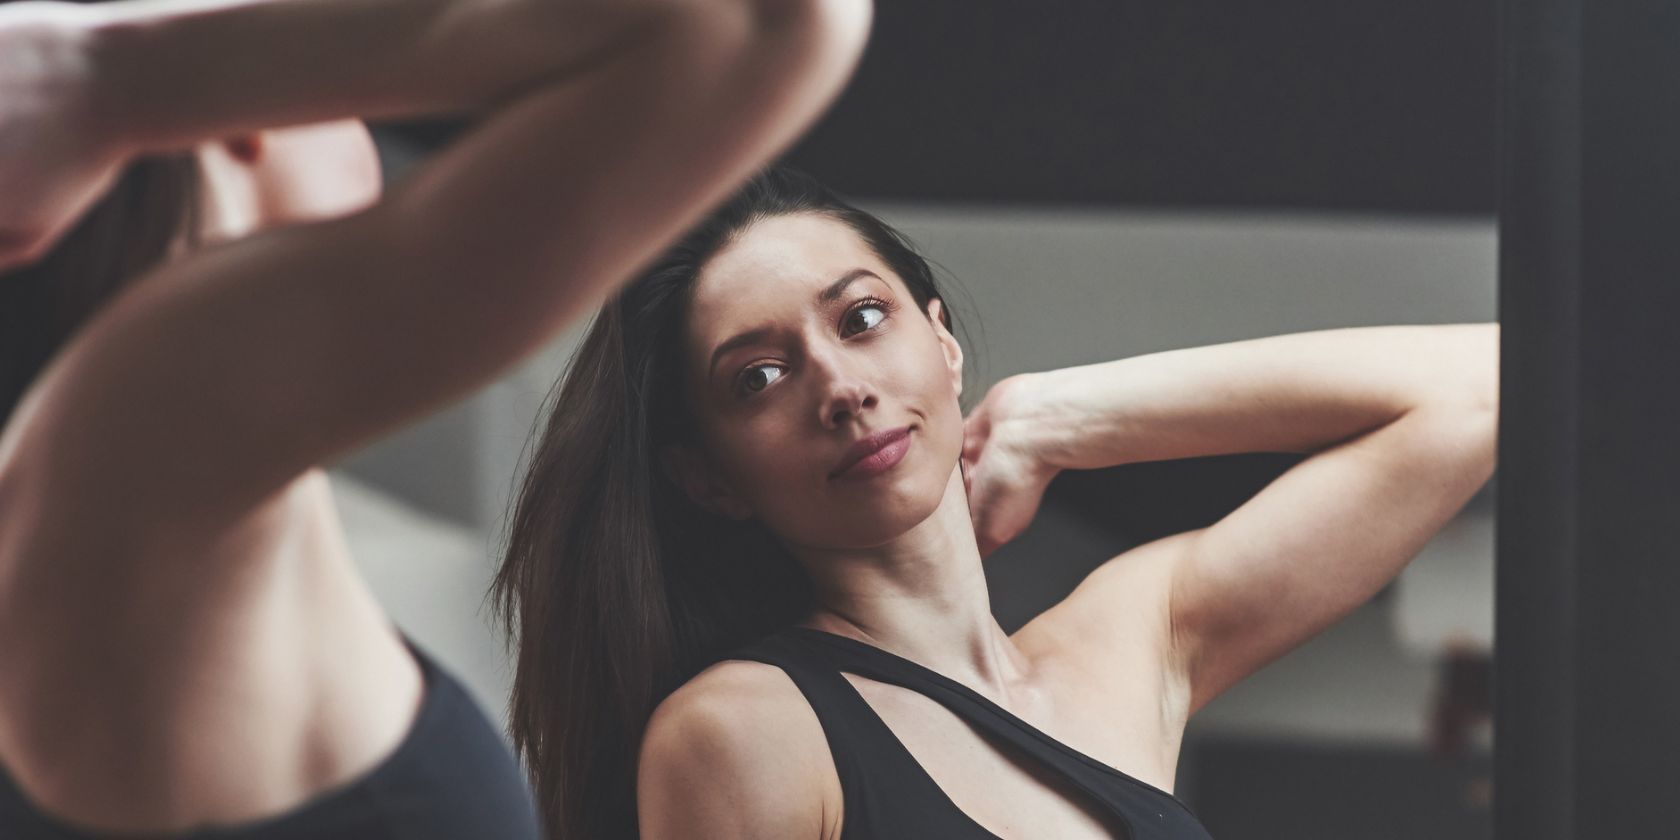 Lululemon Doesn't Like What It Sees in the Mirror